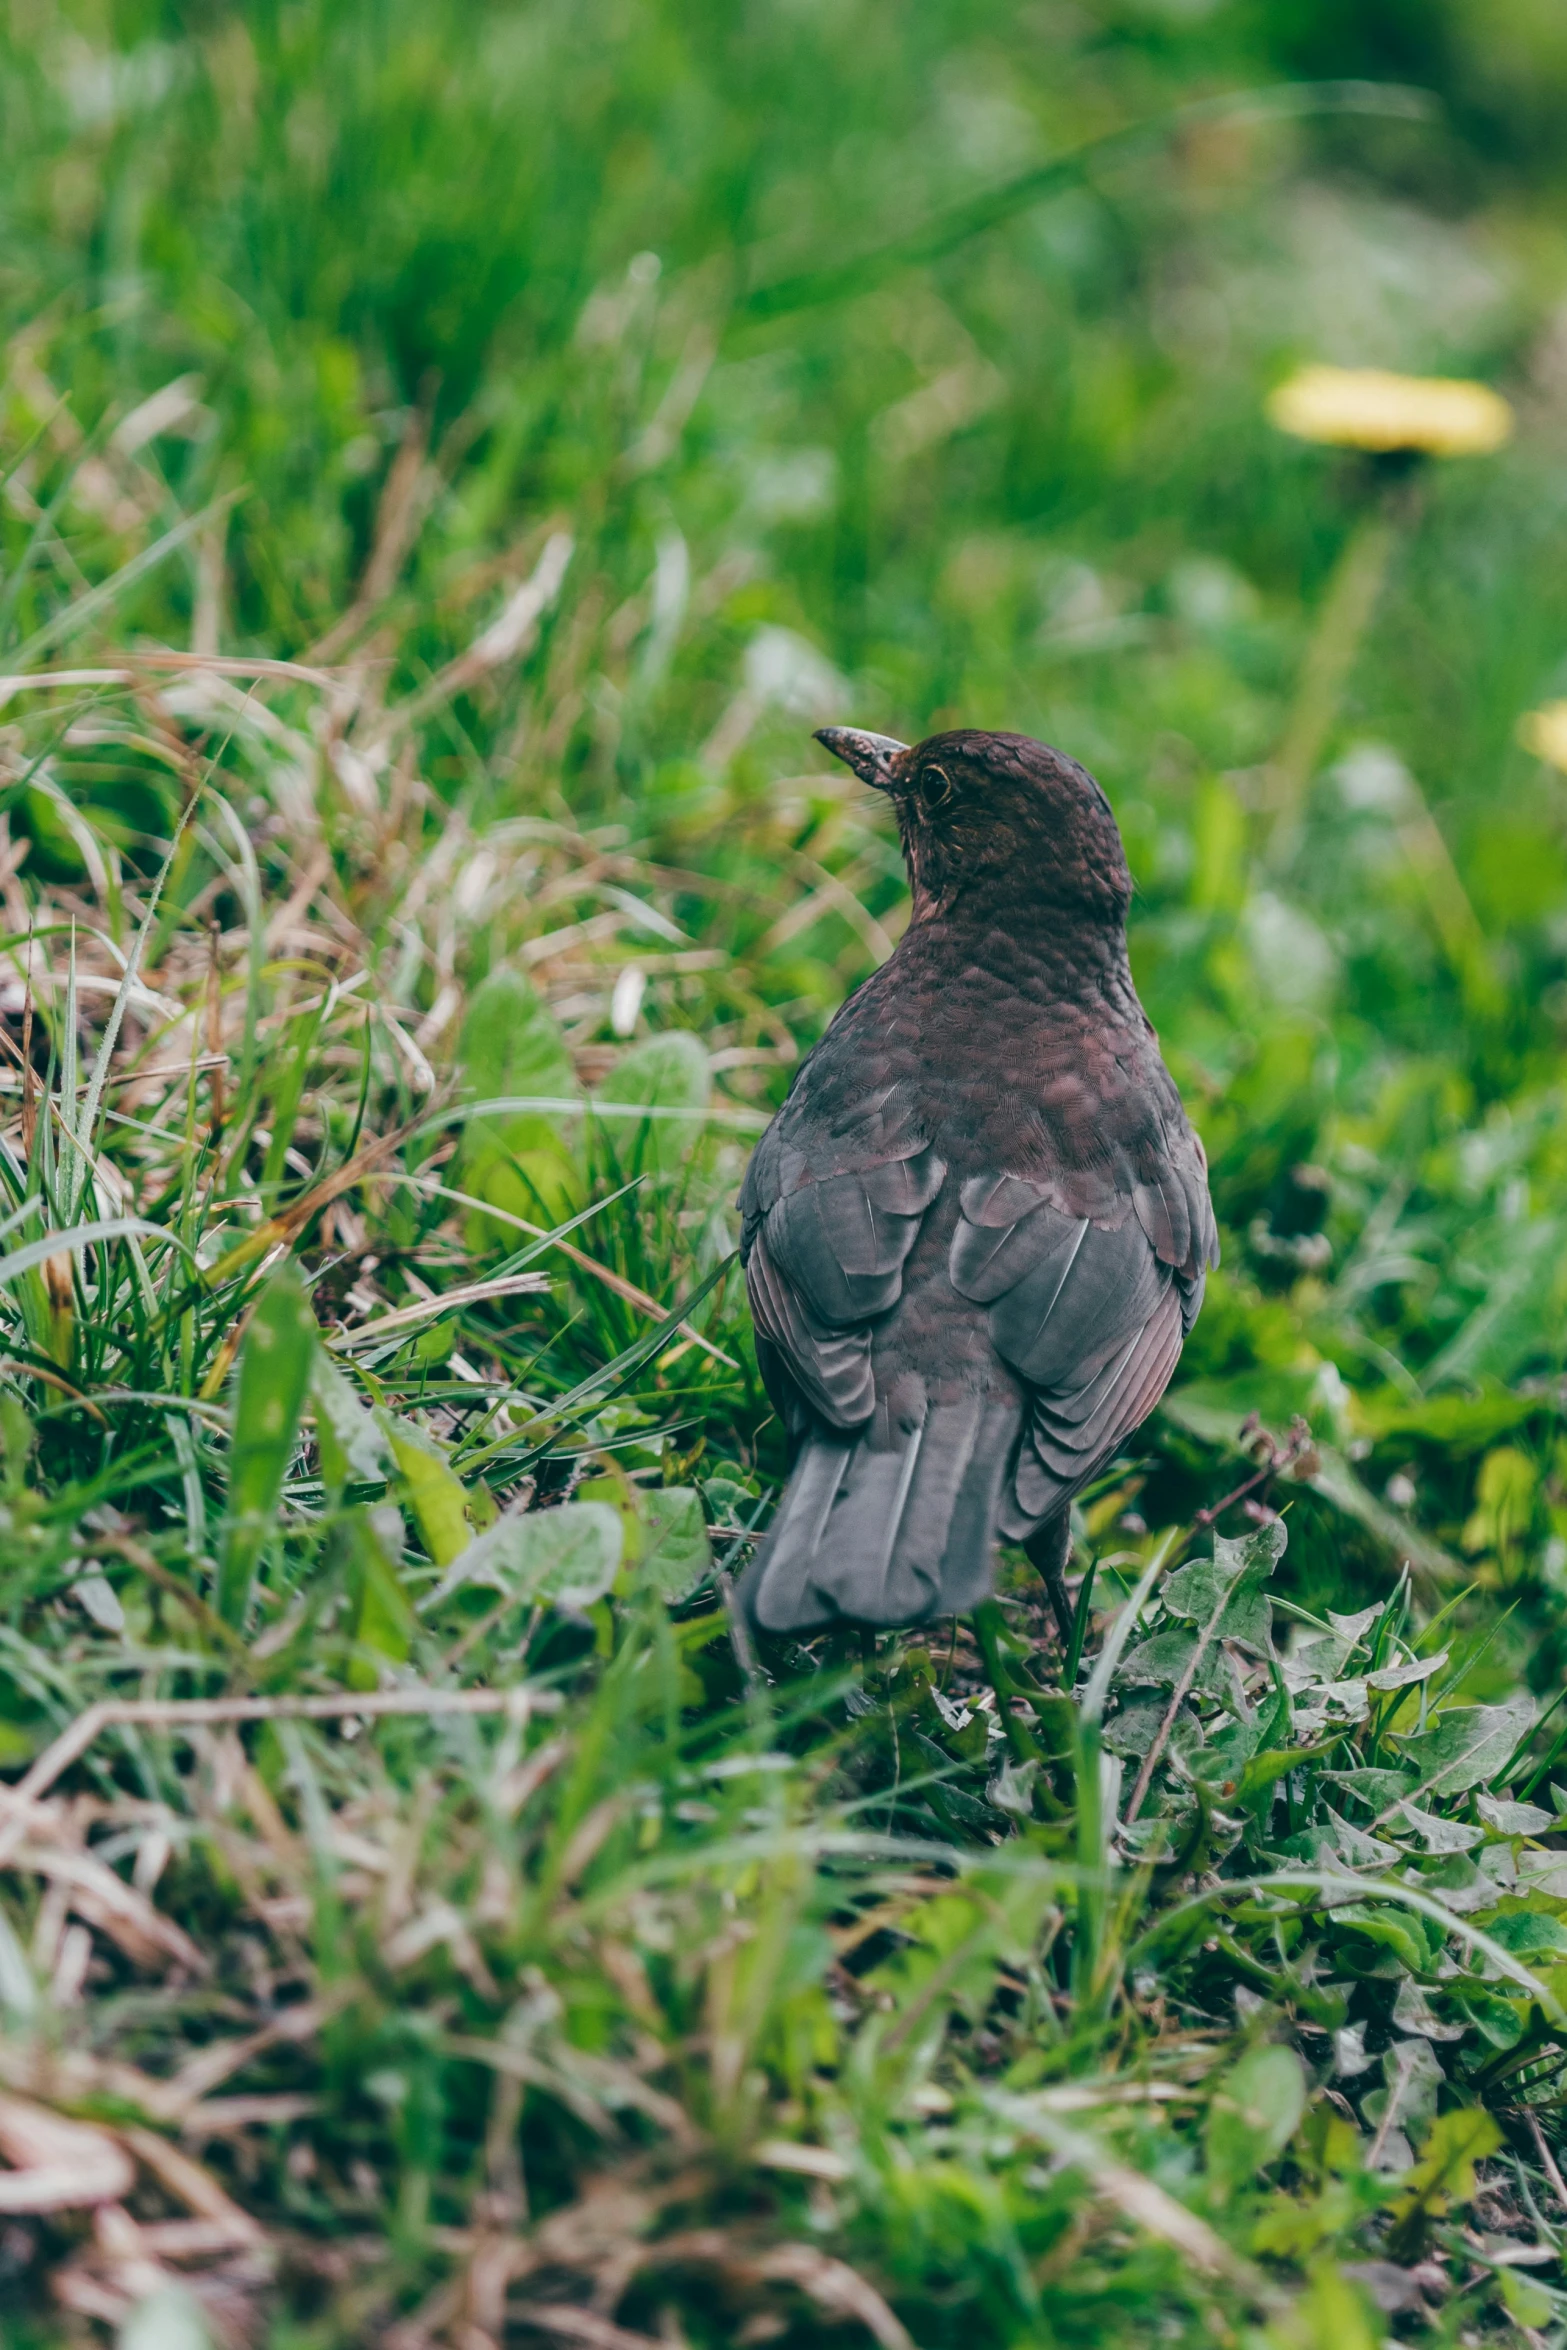 the small bird sits alone in the field